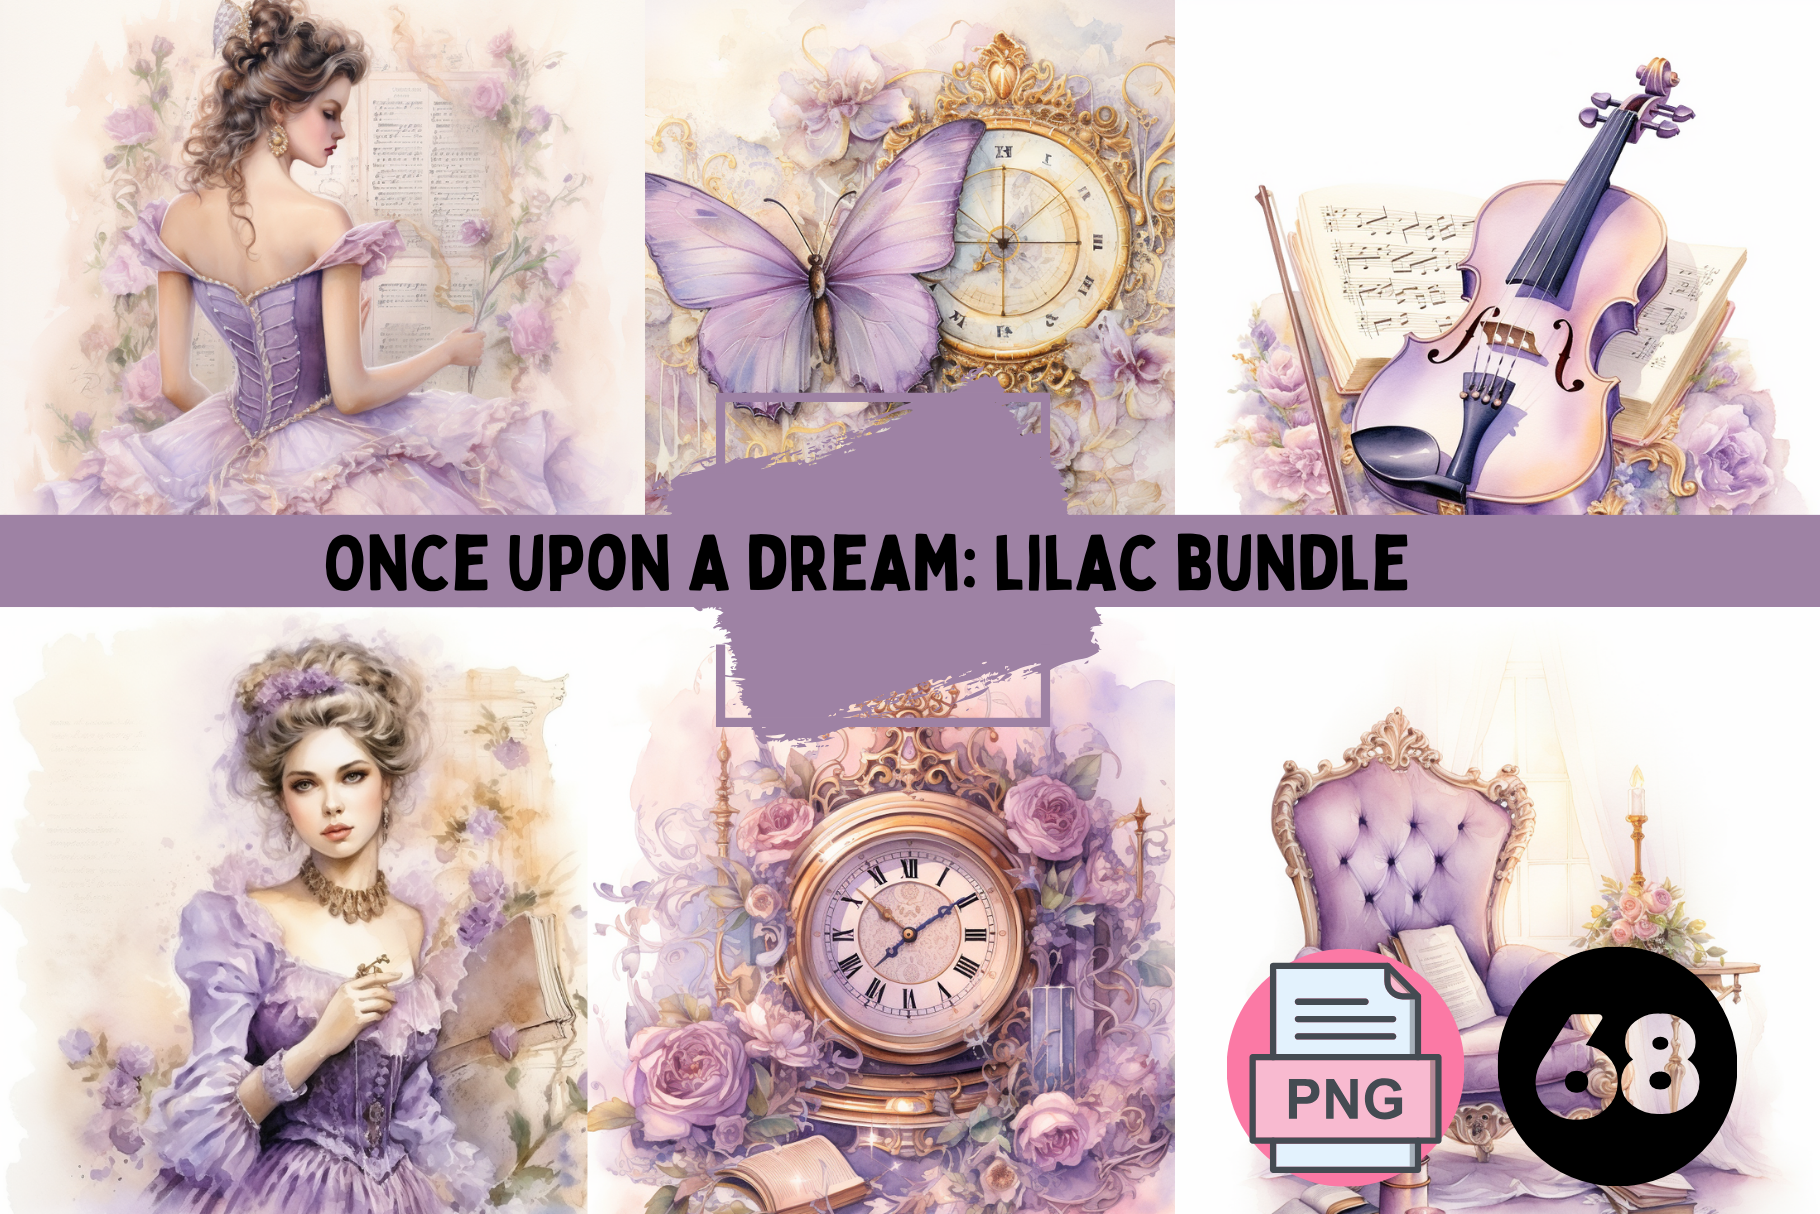 “Once Upon a Dream – Lilac Bundle”